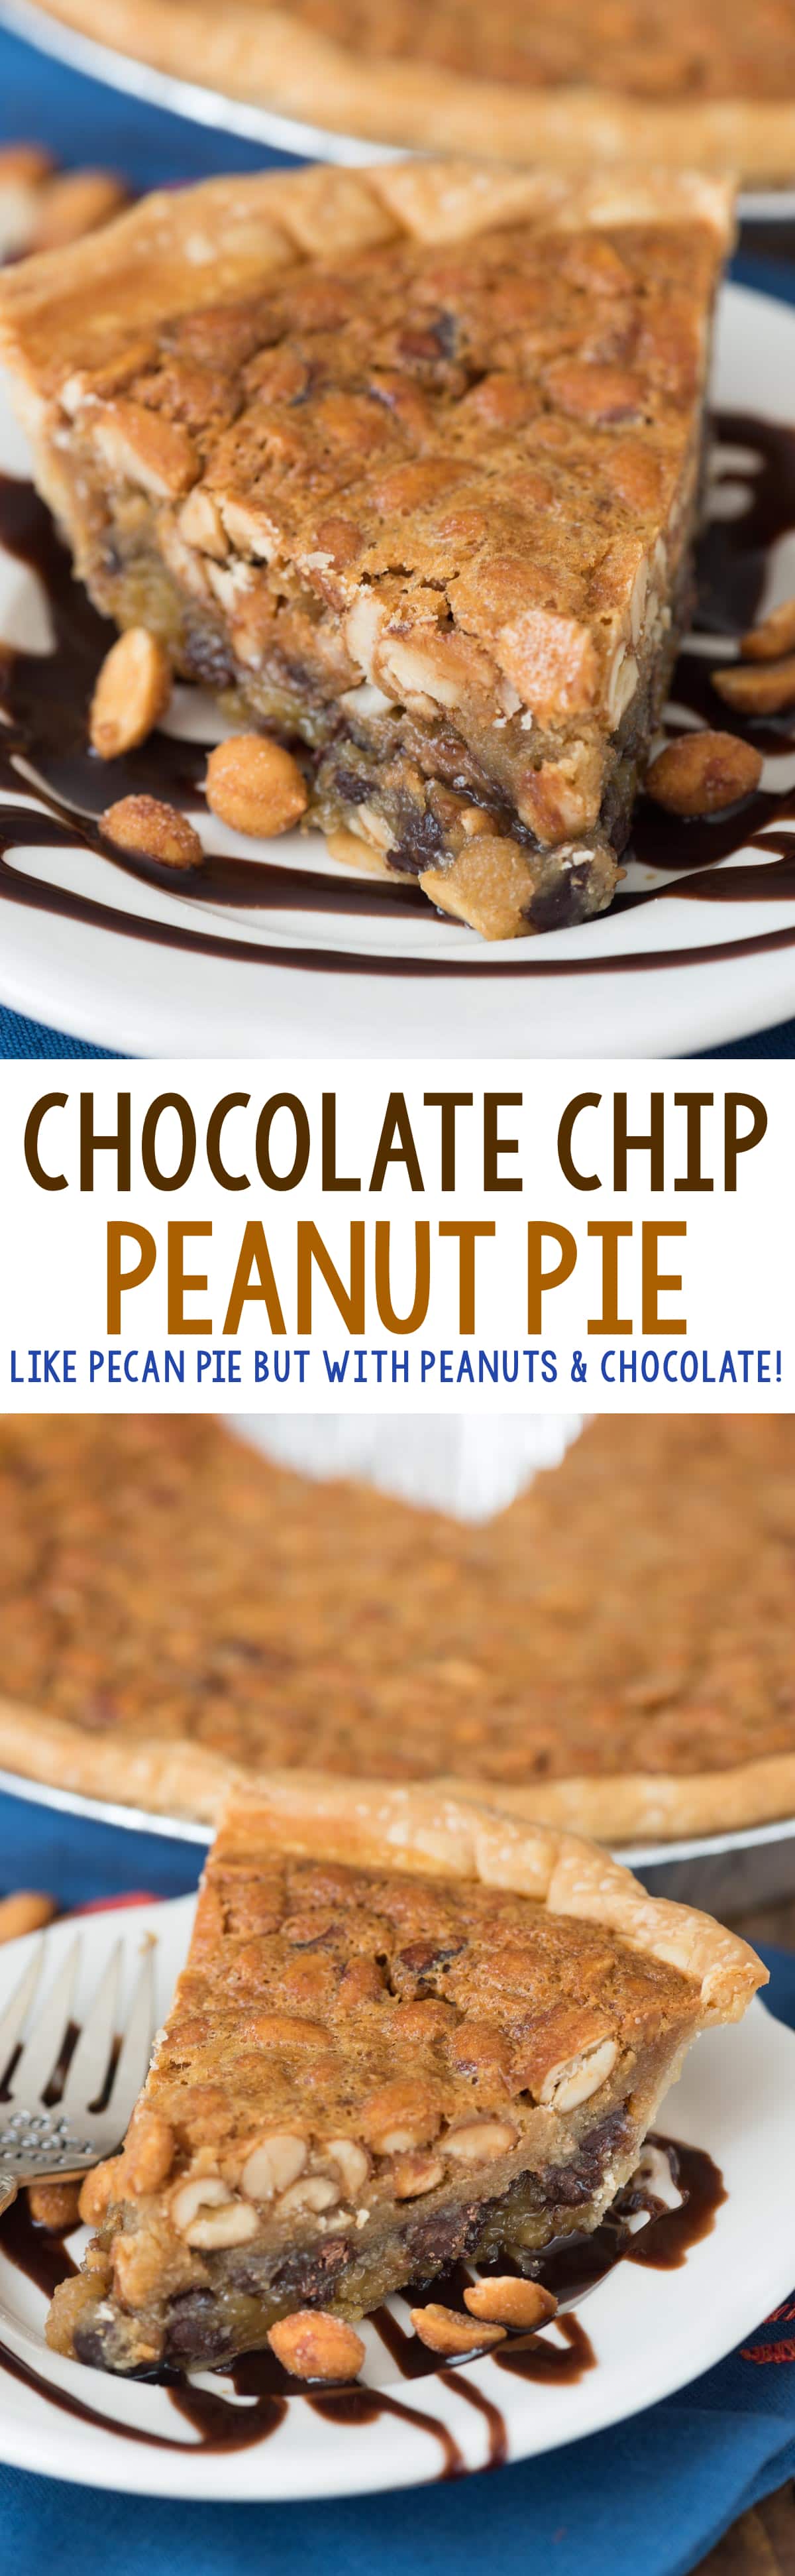 Chocolate Peanut Pie - this EASY pie recipe is full of peanut butter and chocolate with a gooey sweet center. Everyone loved this pie!